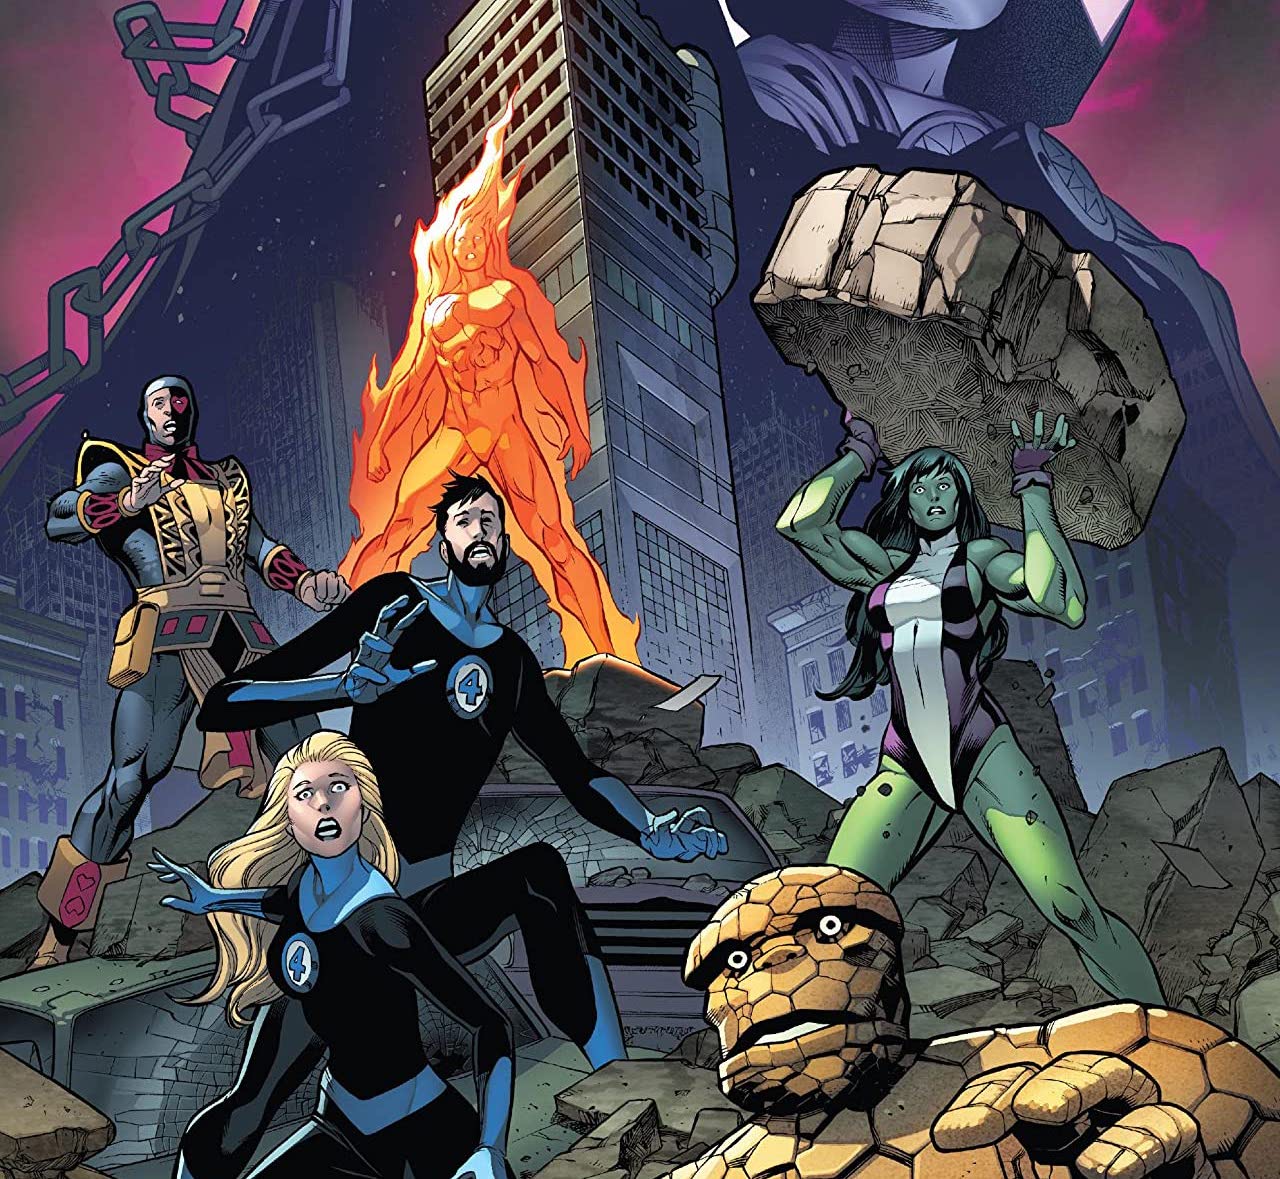 'Fantastic Four: Reckoning War Alpha' #1 sets up a high-stakes event